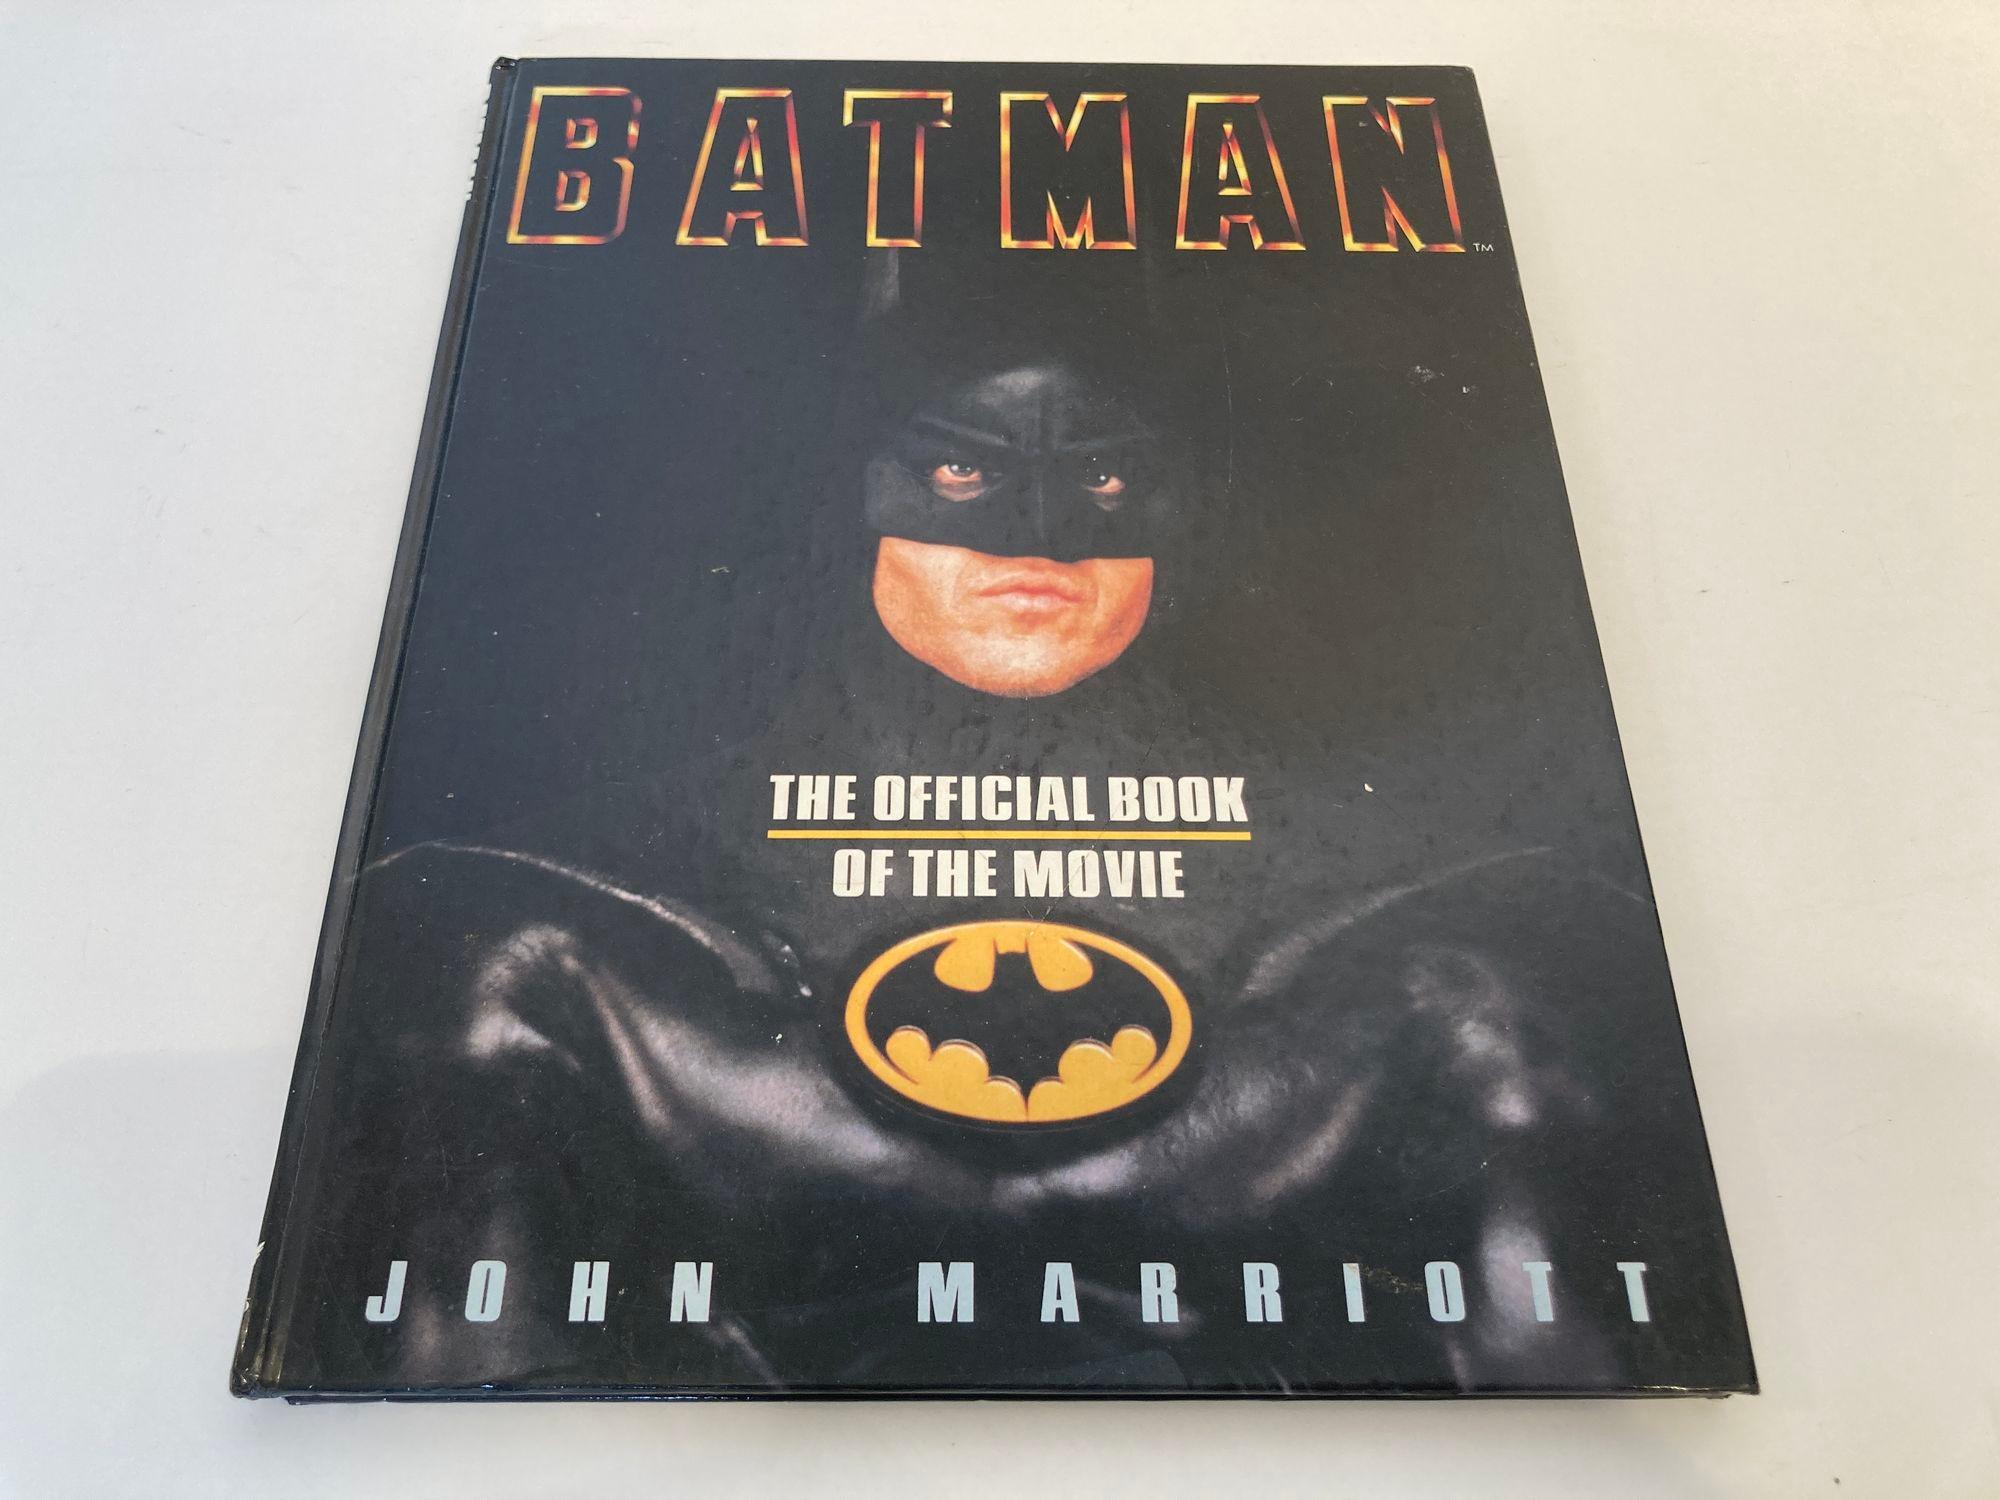 Batman: the Official Book of the Movie by John Marriott Hardcover, 1989 For Sale 9